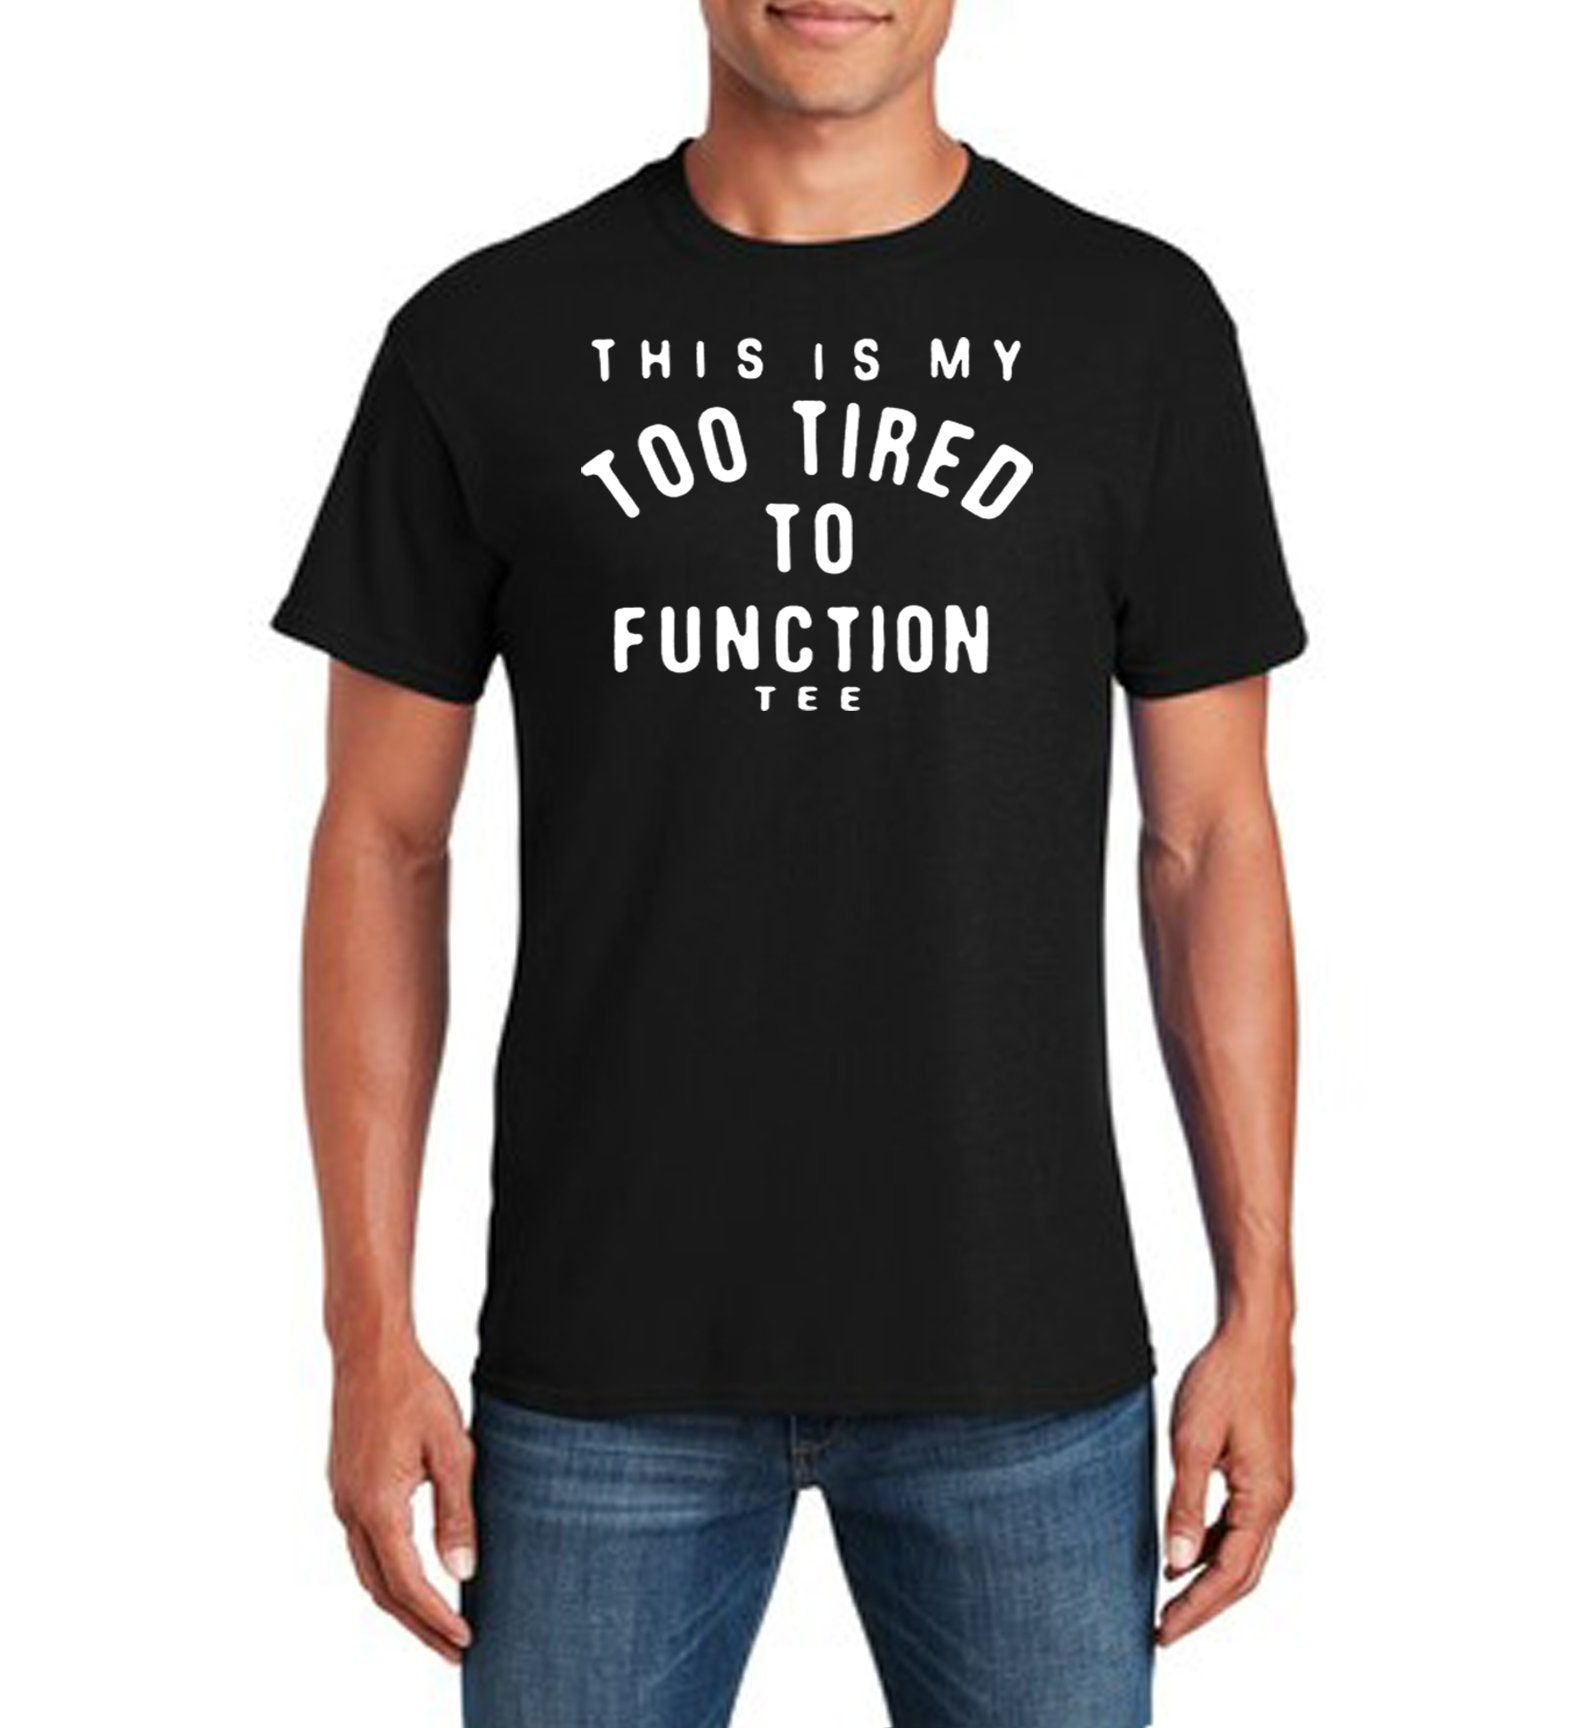 Too Tired To Function Funny T-Shirt